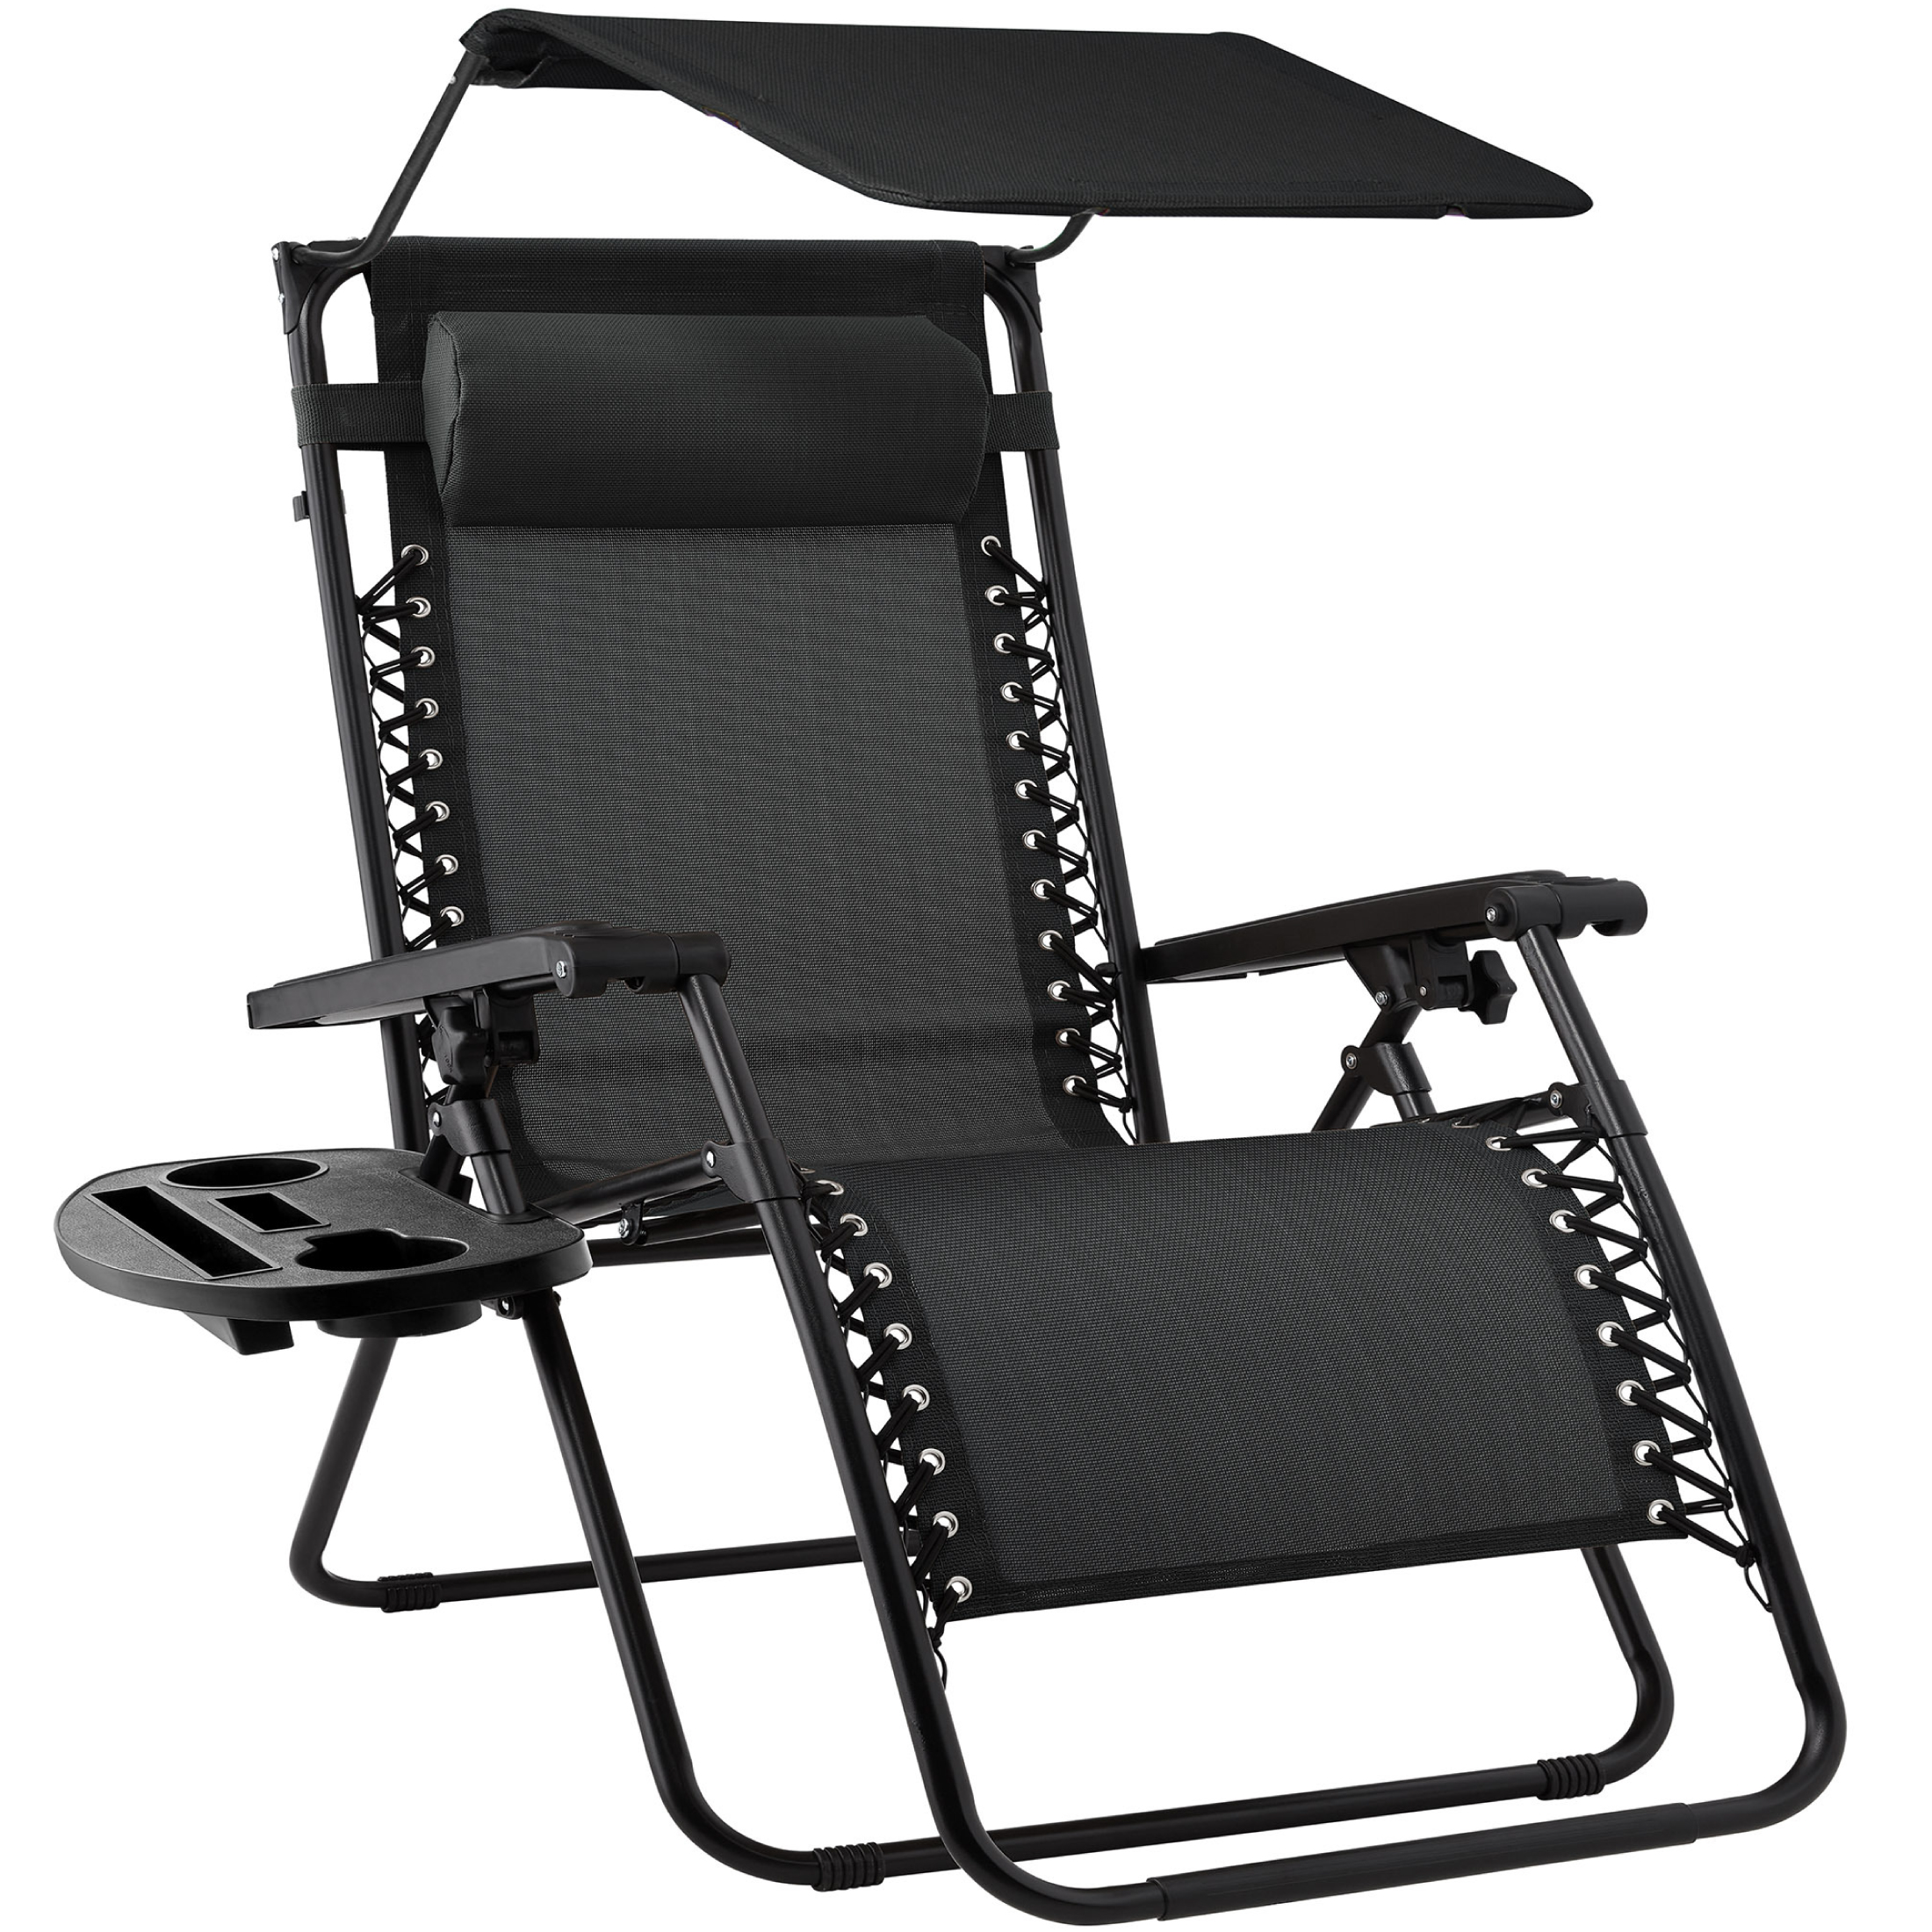 Best Choice Products Folding Zero Gravity Recliner Patio Lounge Chair w/ Canopy Shade, Headrest, Side Tray - Black - image 1 of 8